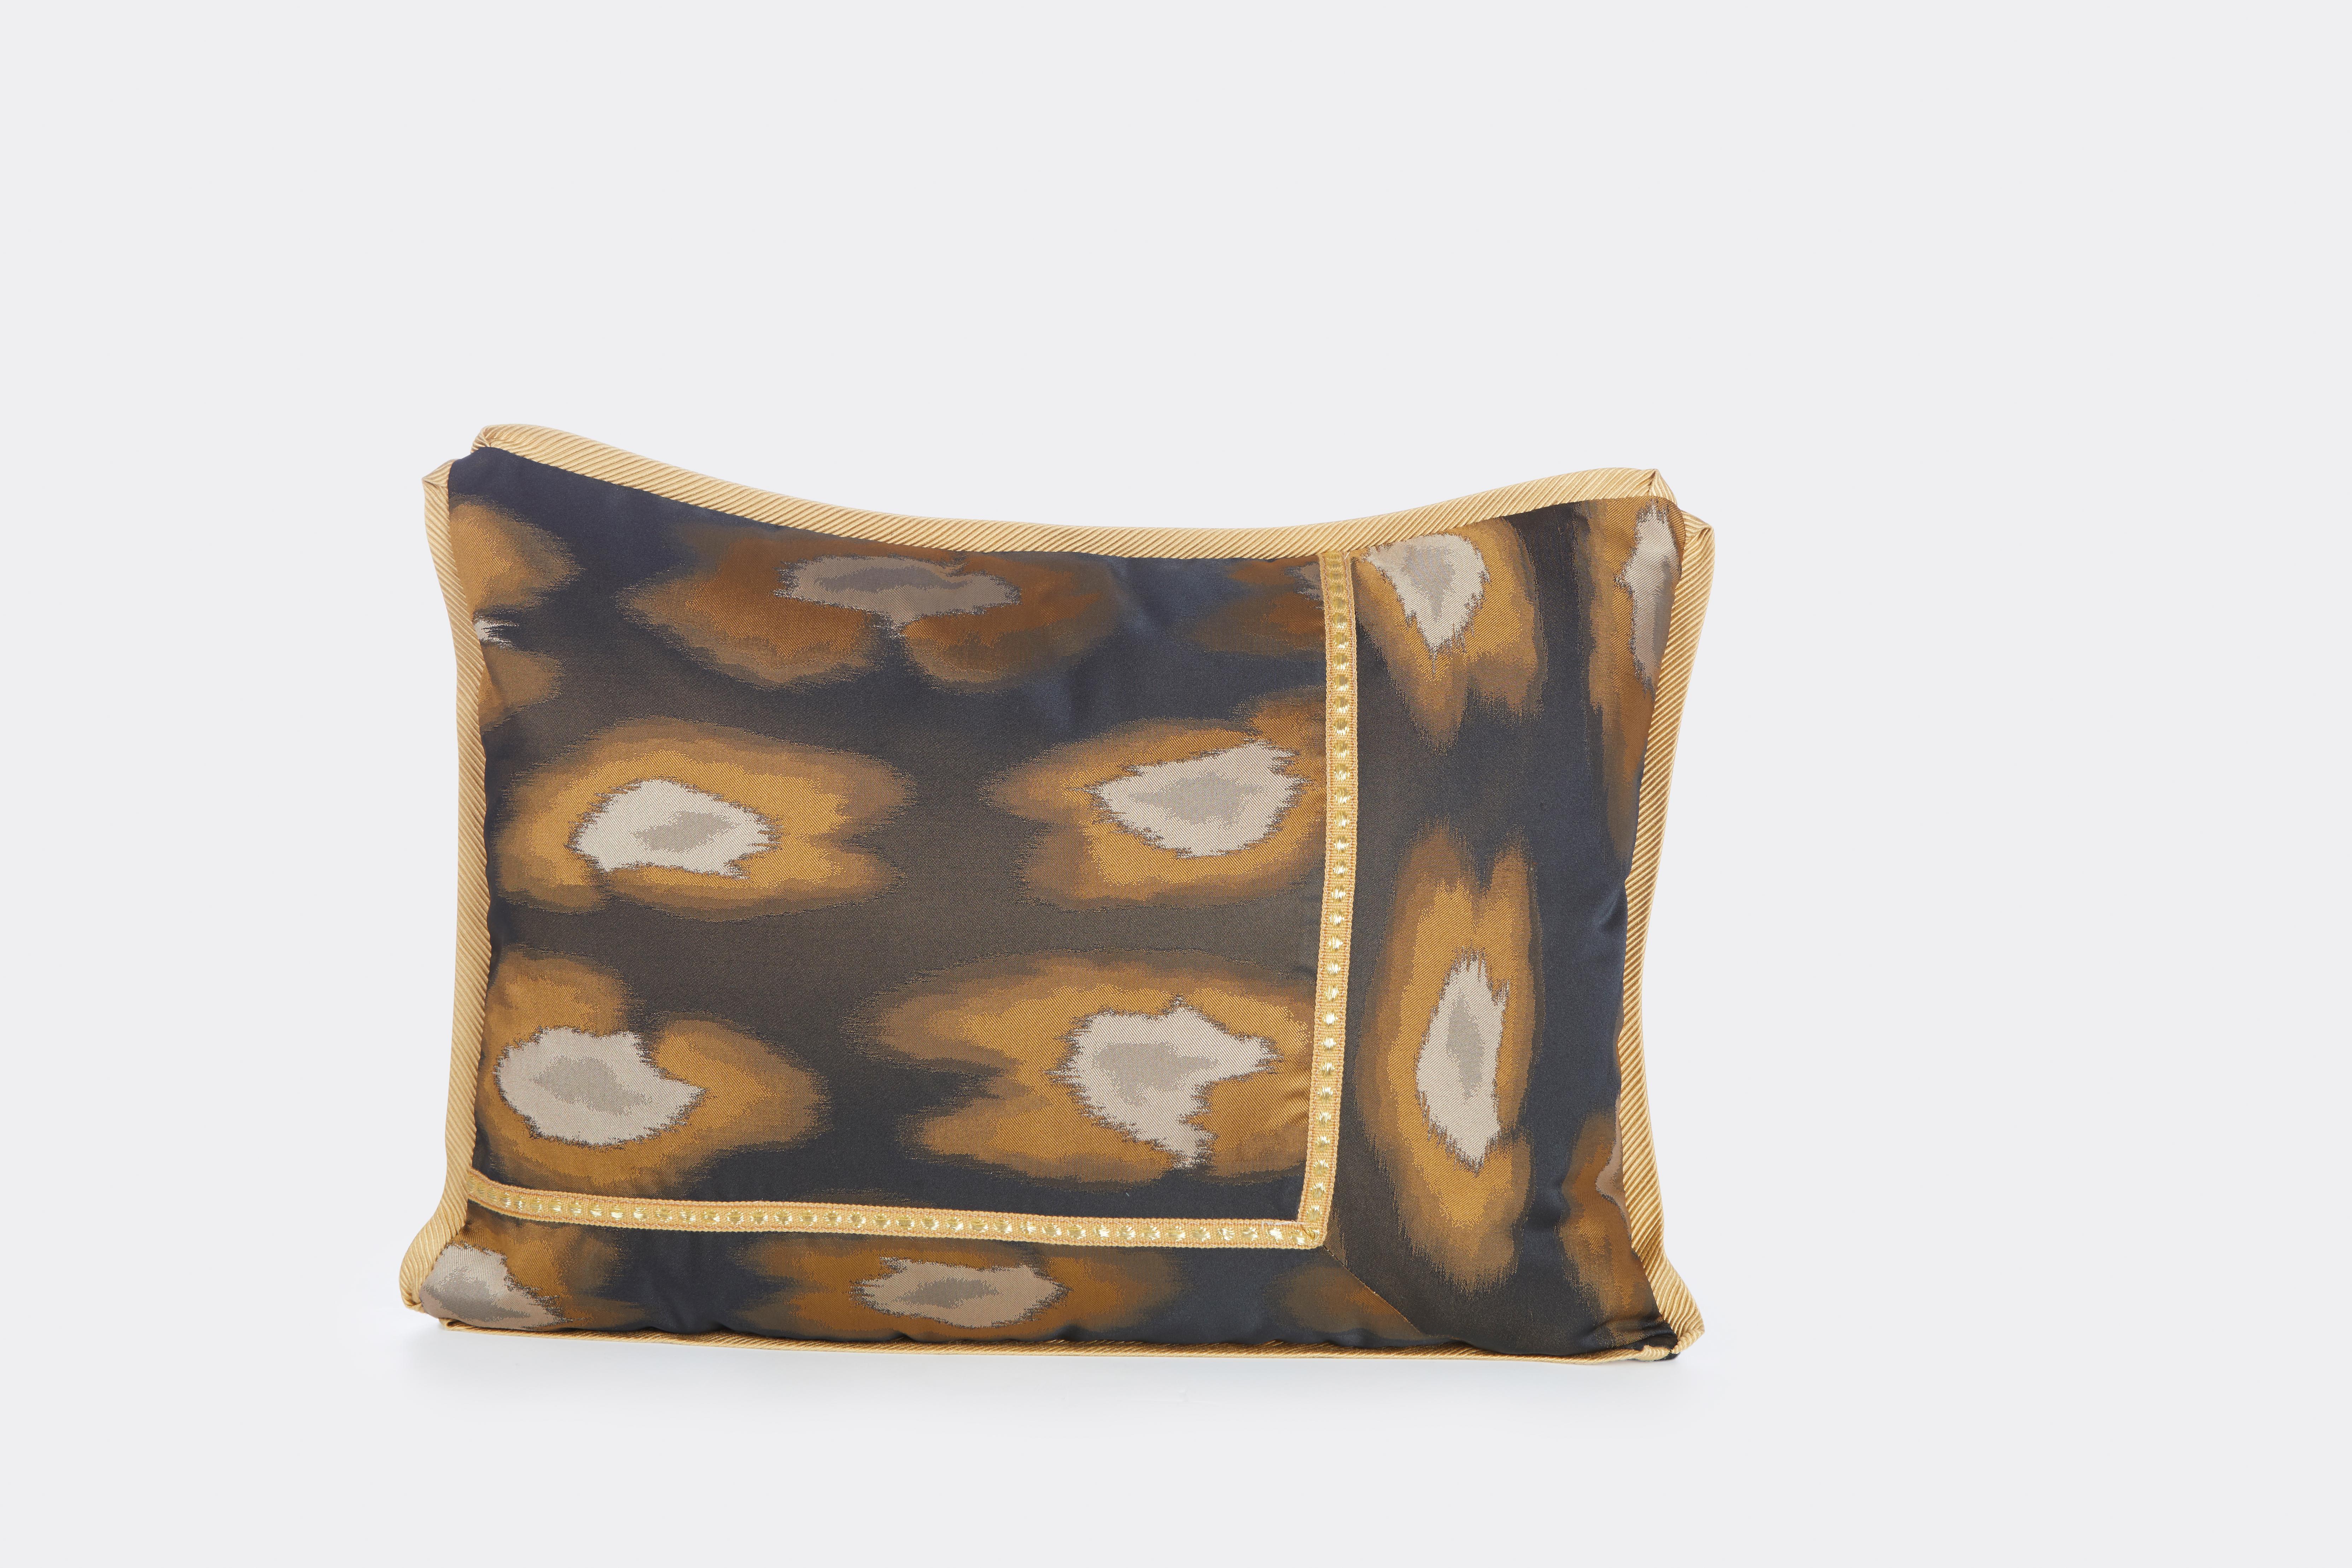 Warp Dyed Silk Dries Van Noten Fabric Cushion In New Condition For Sale In New York, NY